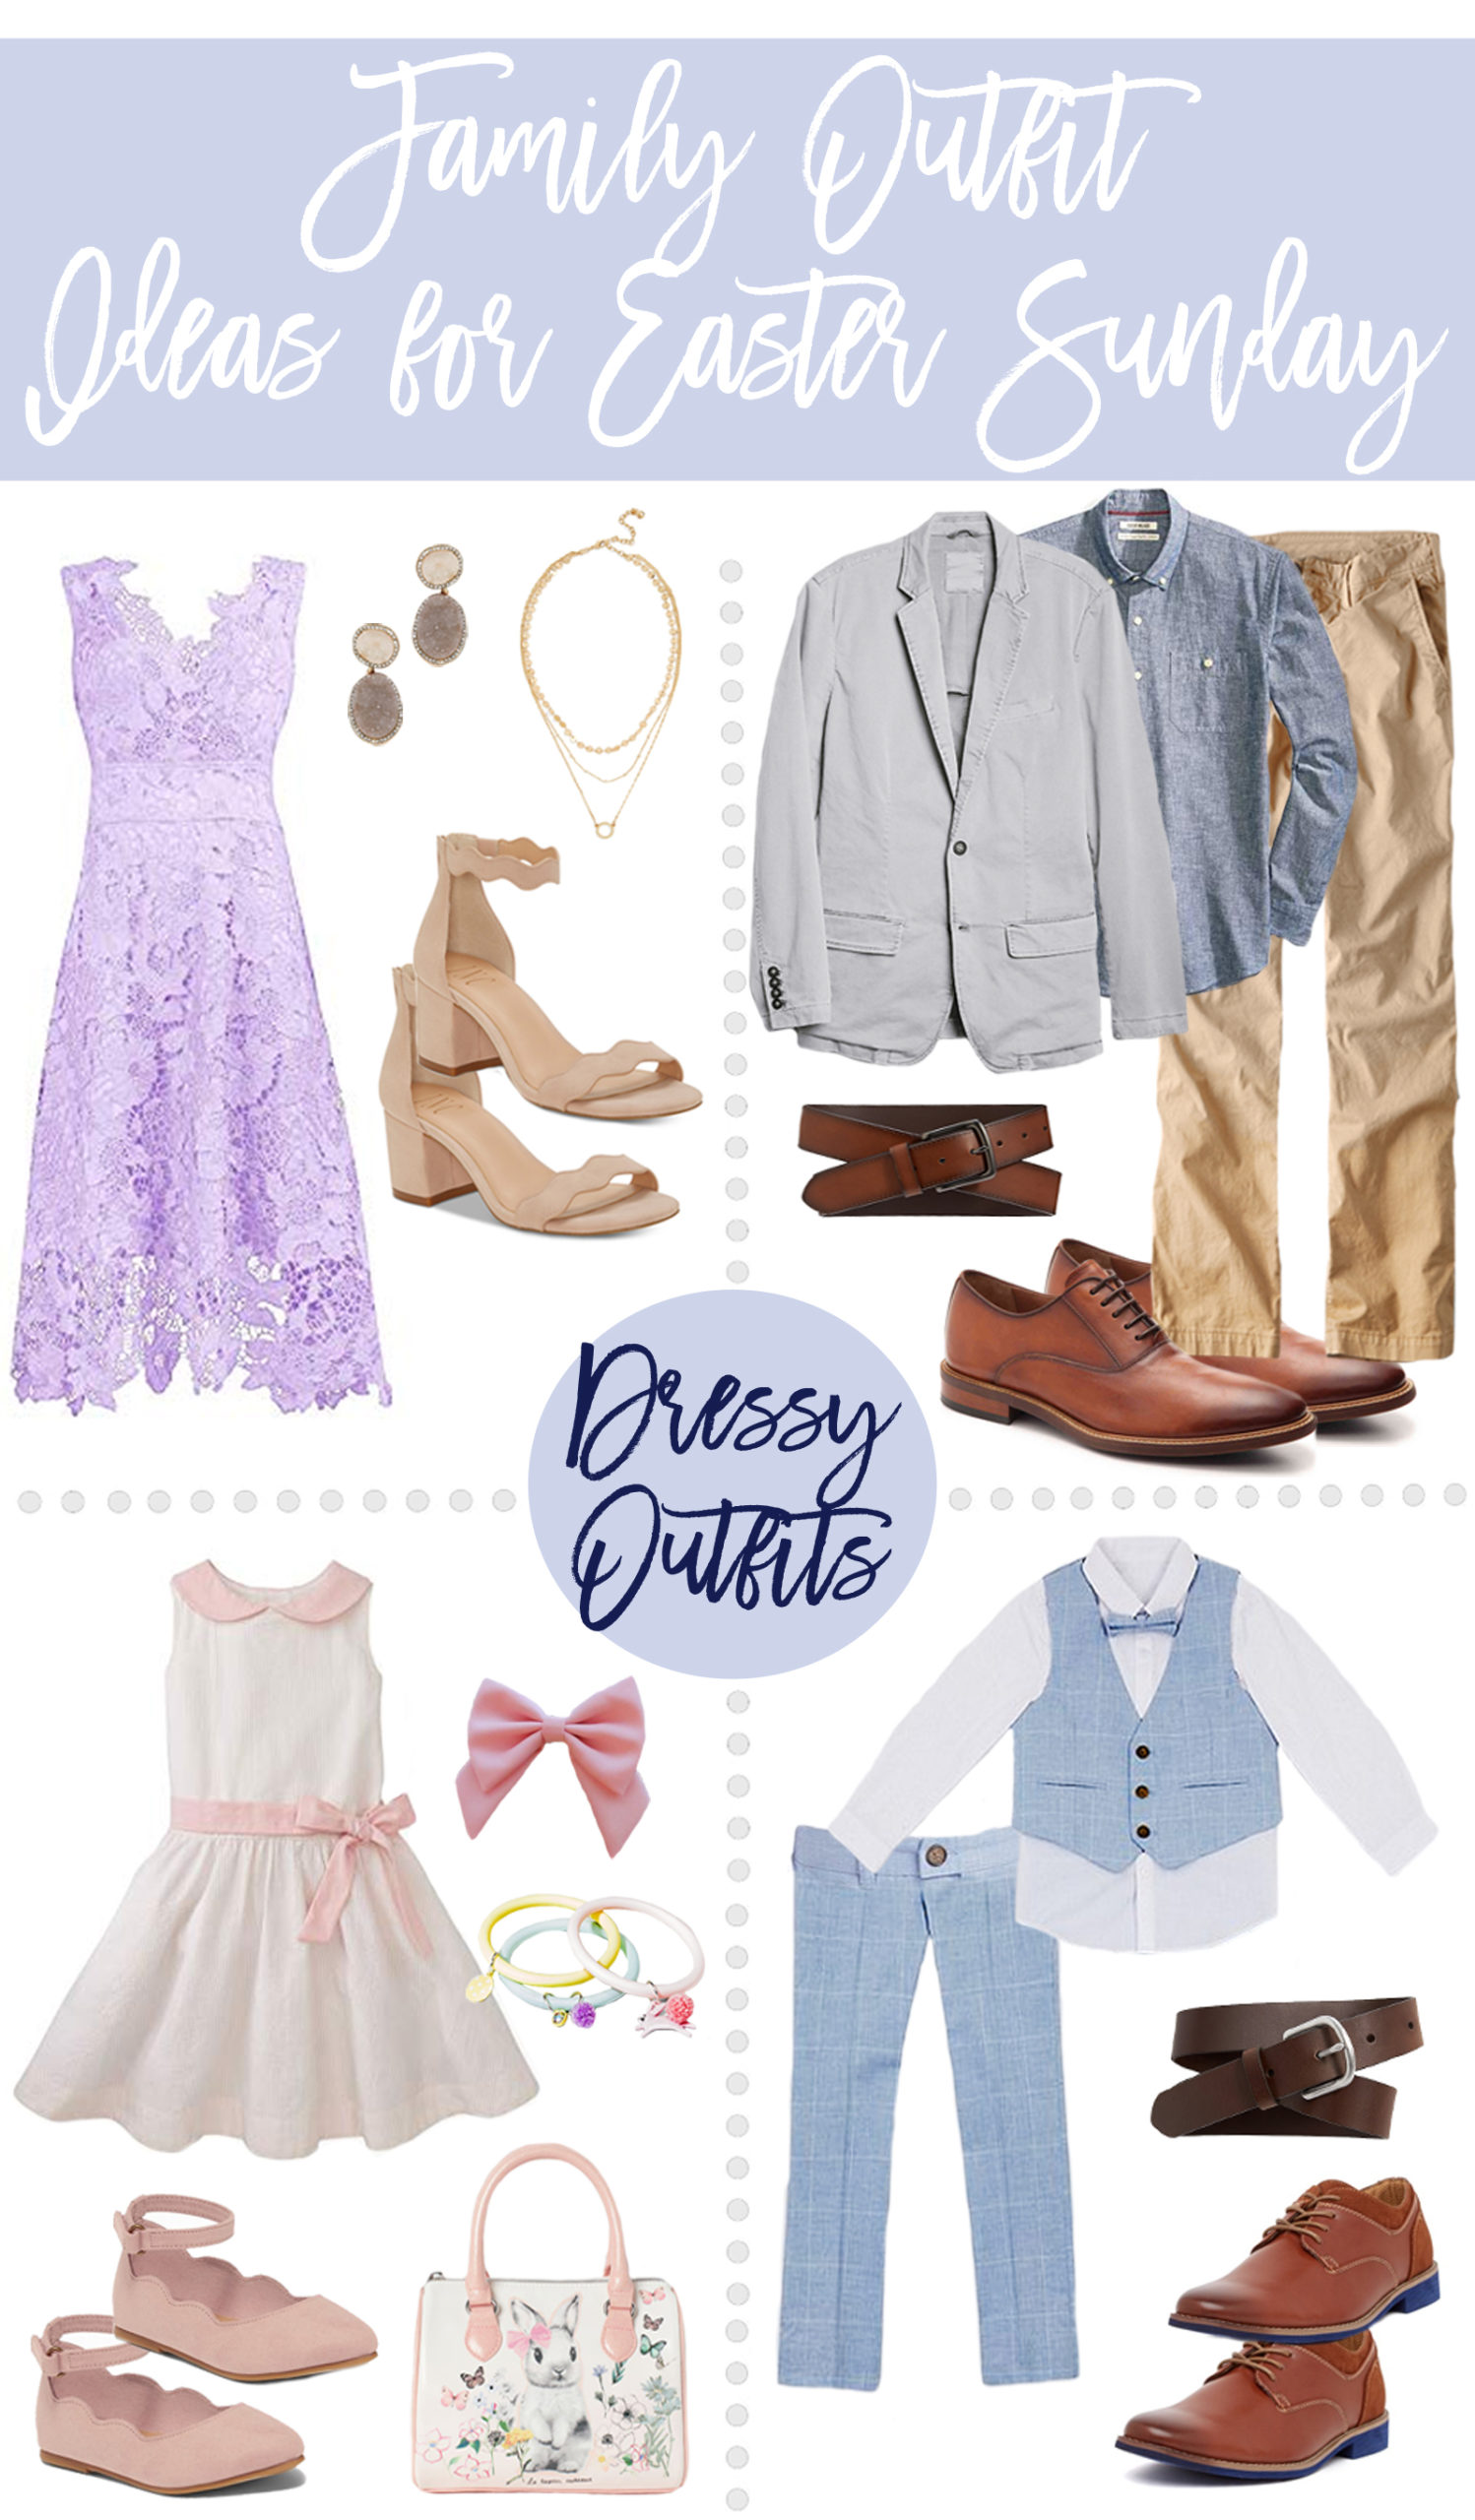 Family Easter Outfit Ideas - Casual and Dressy